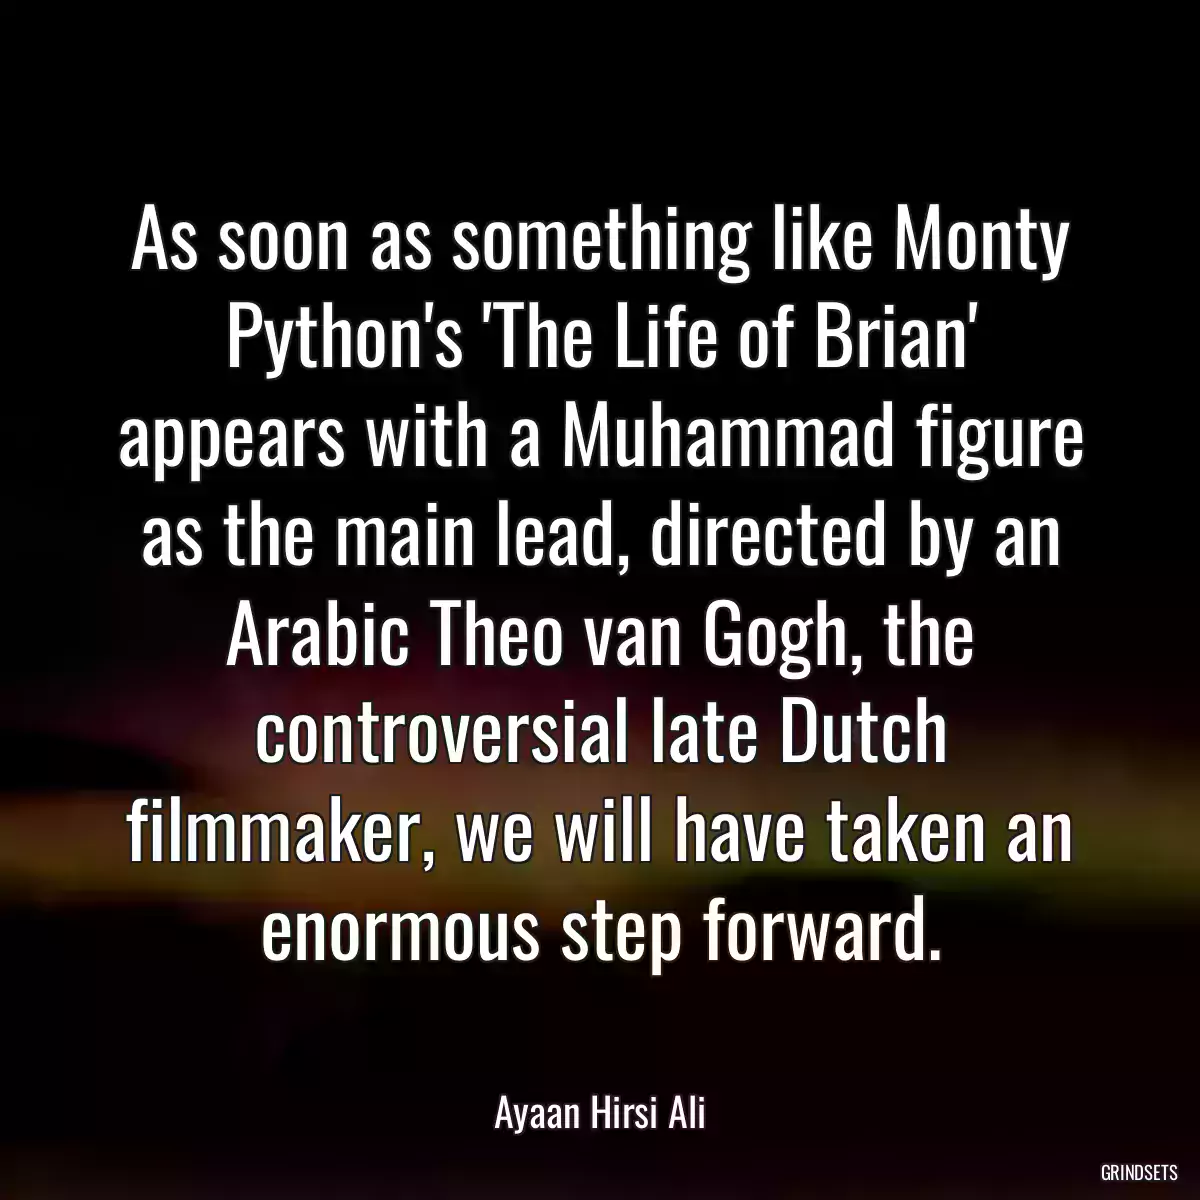 As soon as something like Monty Python\'s \'The Life of Brian\' appears with a Muhammad figure as the main lead, directed by an Arabic Theo van Gogh, the controversial late Dutch filmmaker, we will have taken an enormous step forward.